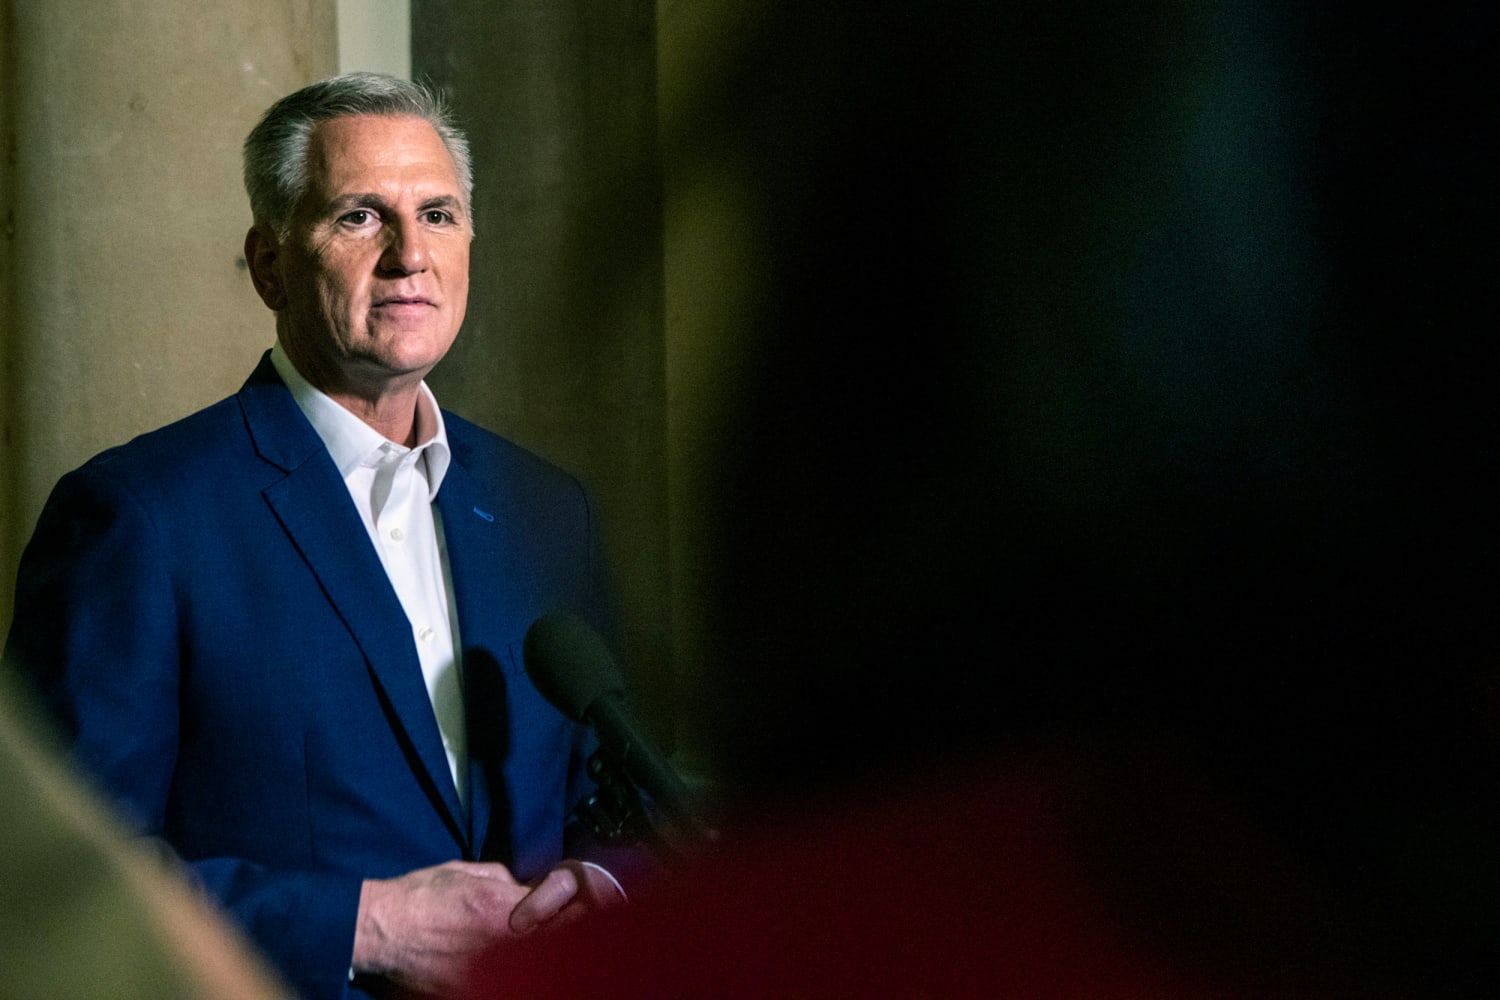 Far-right members, unhappy with debt deal, float threatening McCarthy's speakership